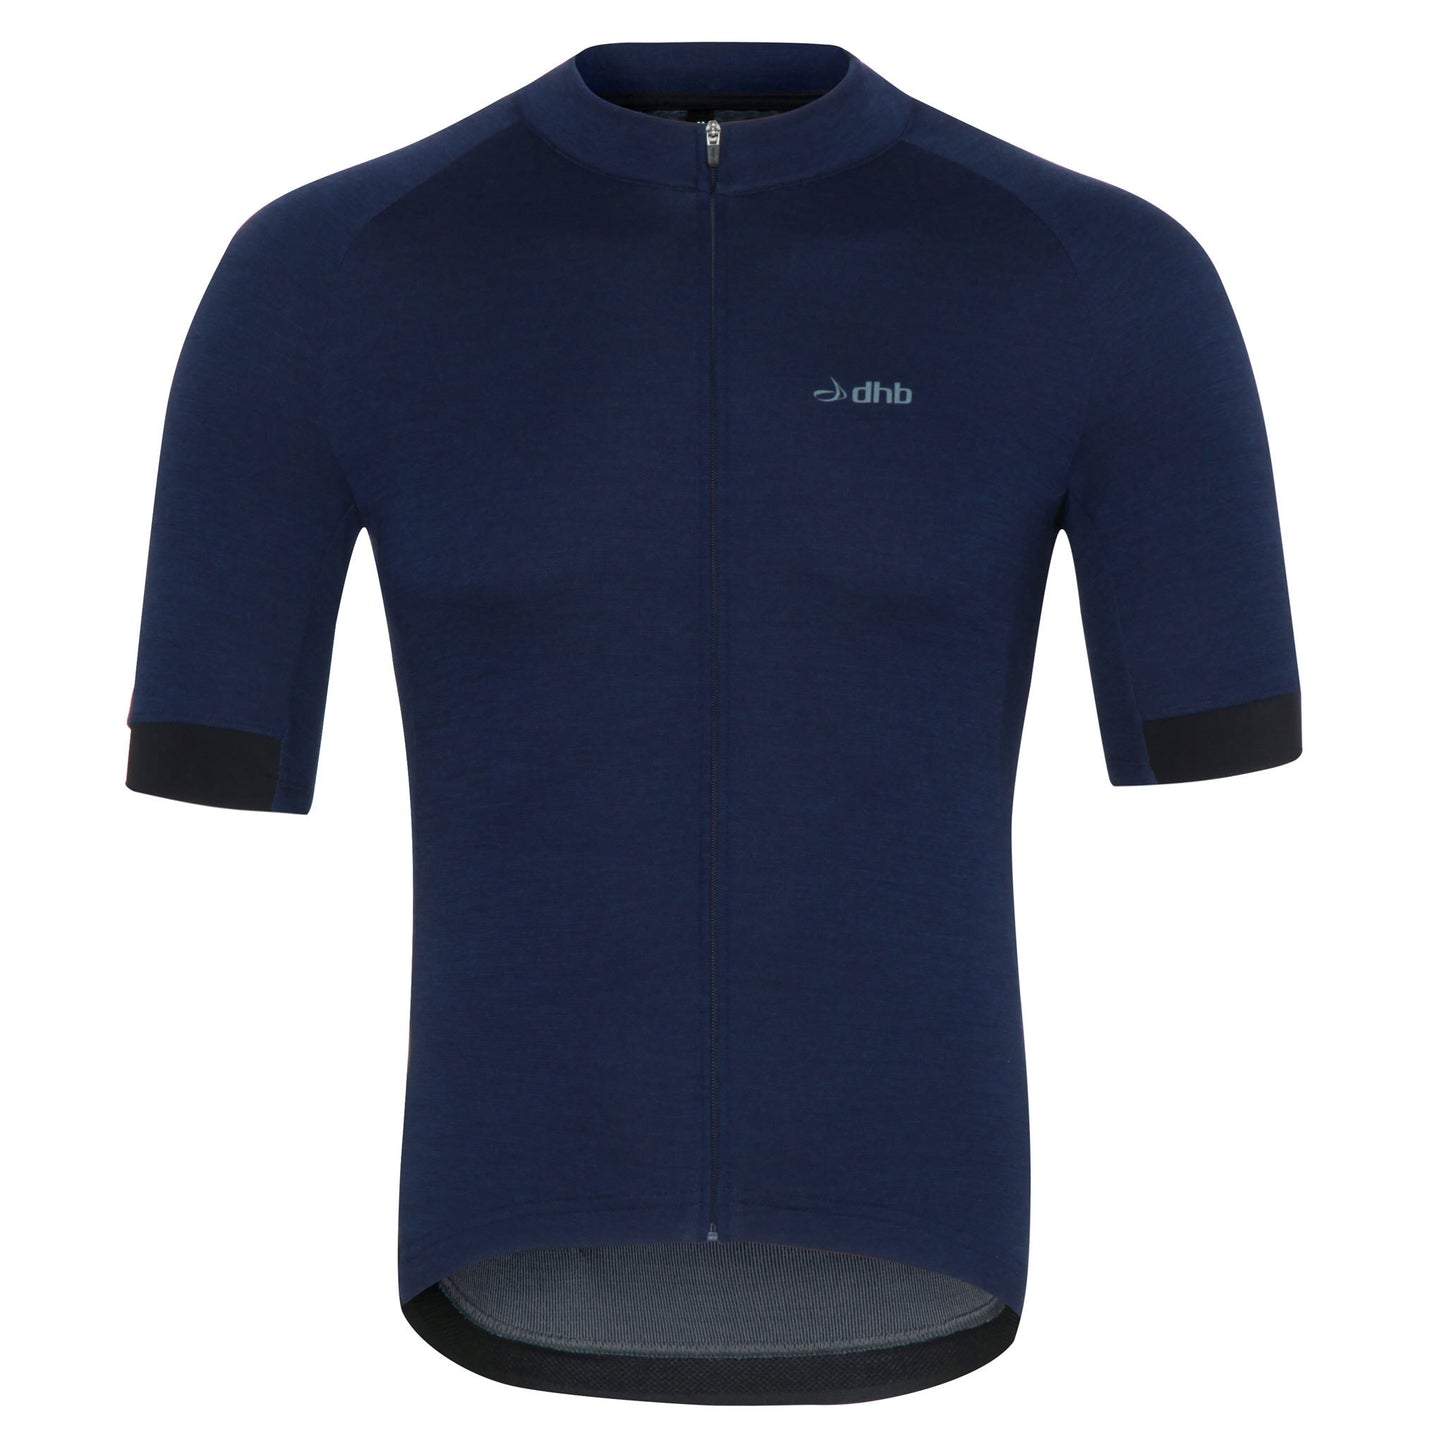 DHB Mens Merino Short Sleeve Jersey, Bright Blue, buy online at Woolys Wheels with free Australia-wide delivery!